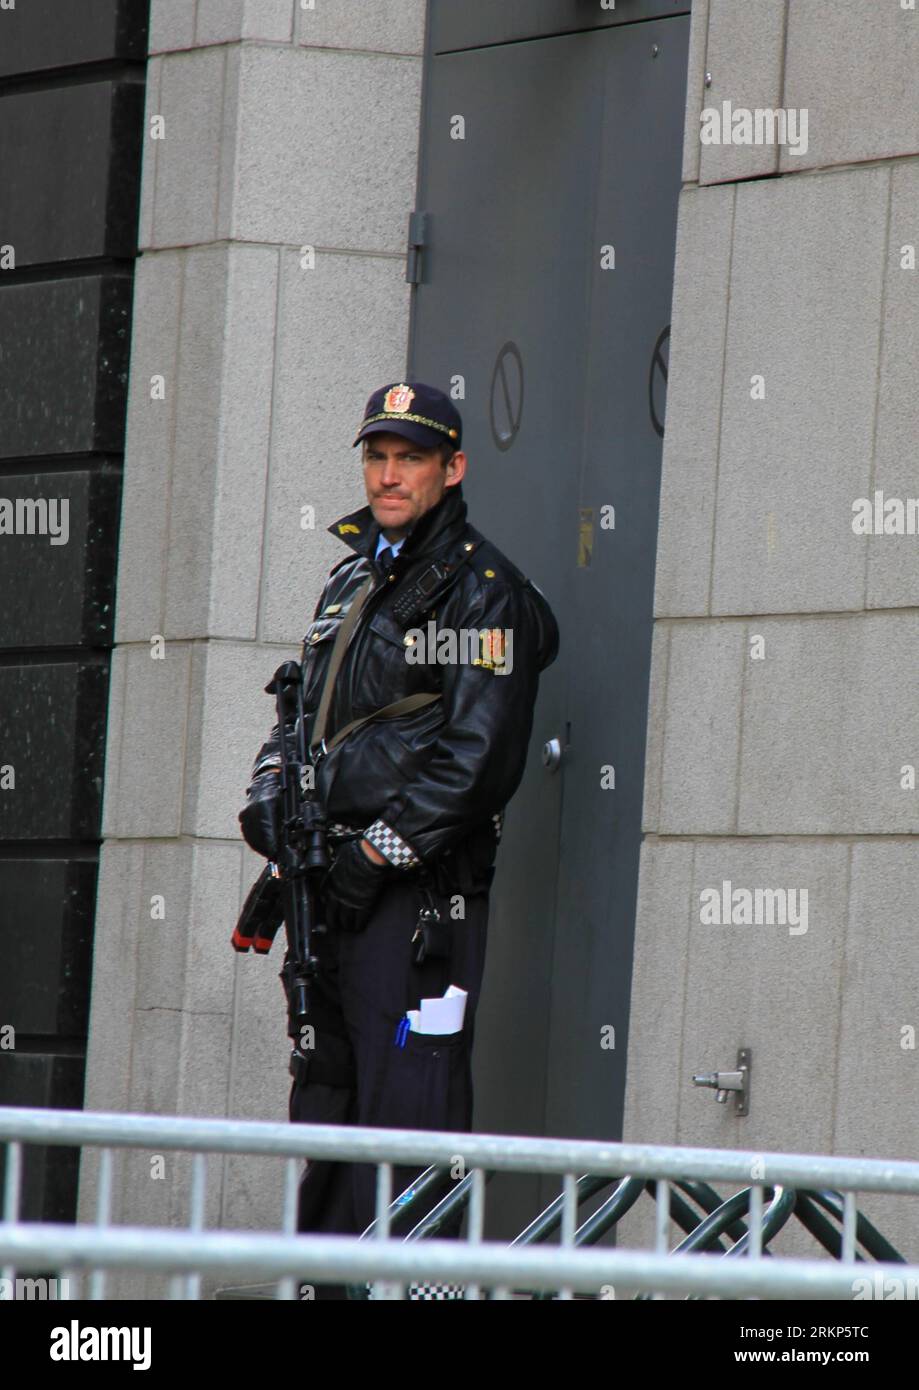 Bildnummer: 57900170  Datum: 16.04.2012  Copyright: imago/Xinhua (120416) -- OSLO, April 16, 2012 (Xinhua) -- An armed police stands guard outside the Oslo District Court where Norwegian Anders Behring Breivik is on trial in Oslo, Norway, on April 16, 2012. Norway s mass killer Anders Behring Breivik pleaded not guilty during court proceedings after the trial of the July 22 case began on Monday morning at the Oslo District Court. On July 22, 2011, Breivik killed 77 in twin attacks -- a bomb explosion in downtown Oslo and a subsequent shooting spree on Utoeya island, some 40 kilometers northwes Stock Photo